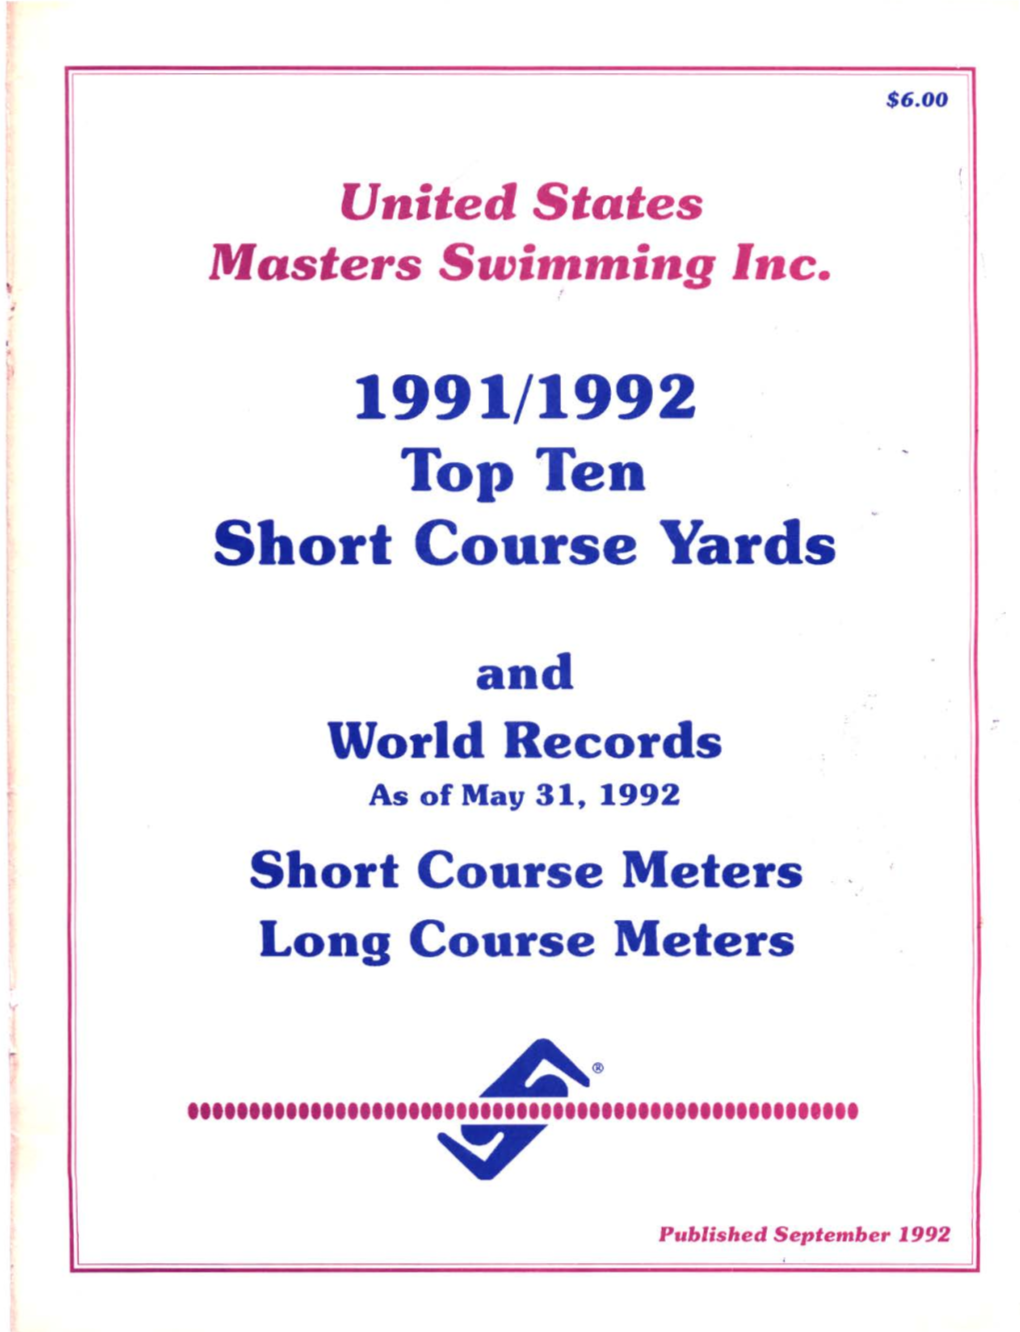 1991/1992 Short Course Yards